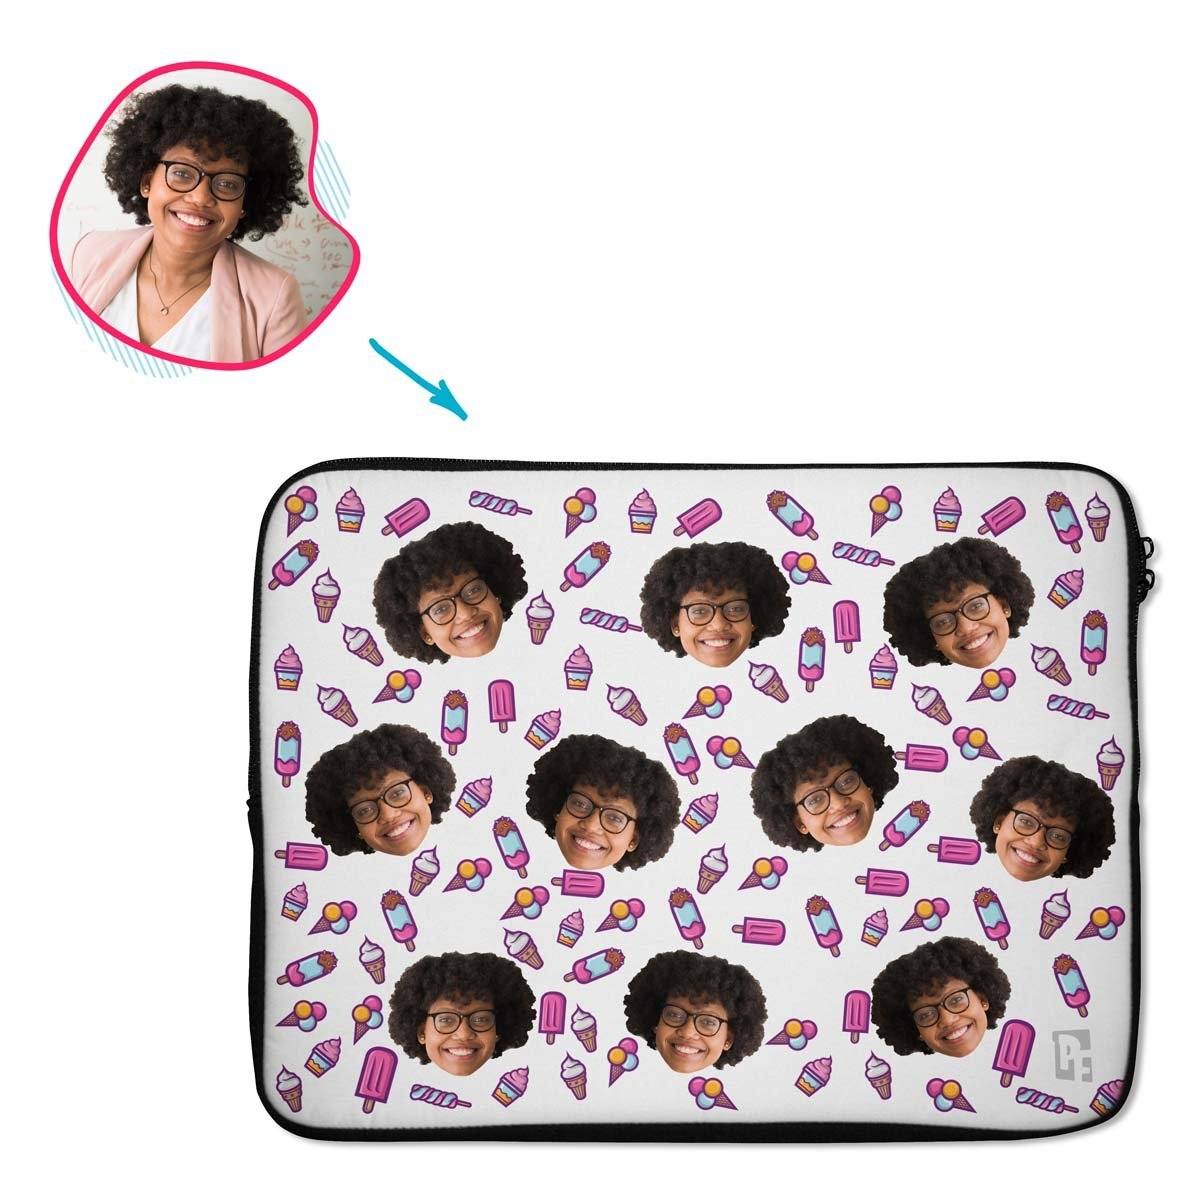 white Candies laptop sleeve personalized with photo of face printed on them